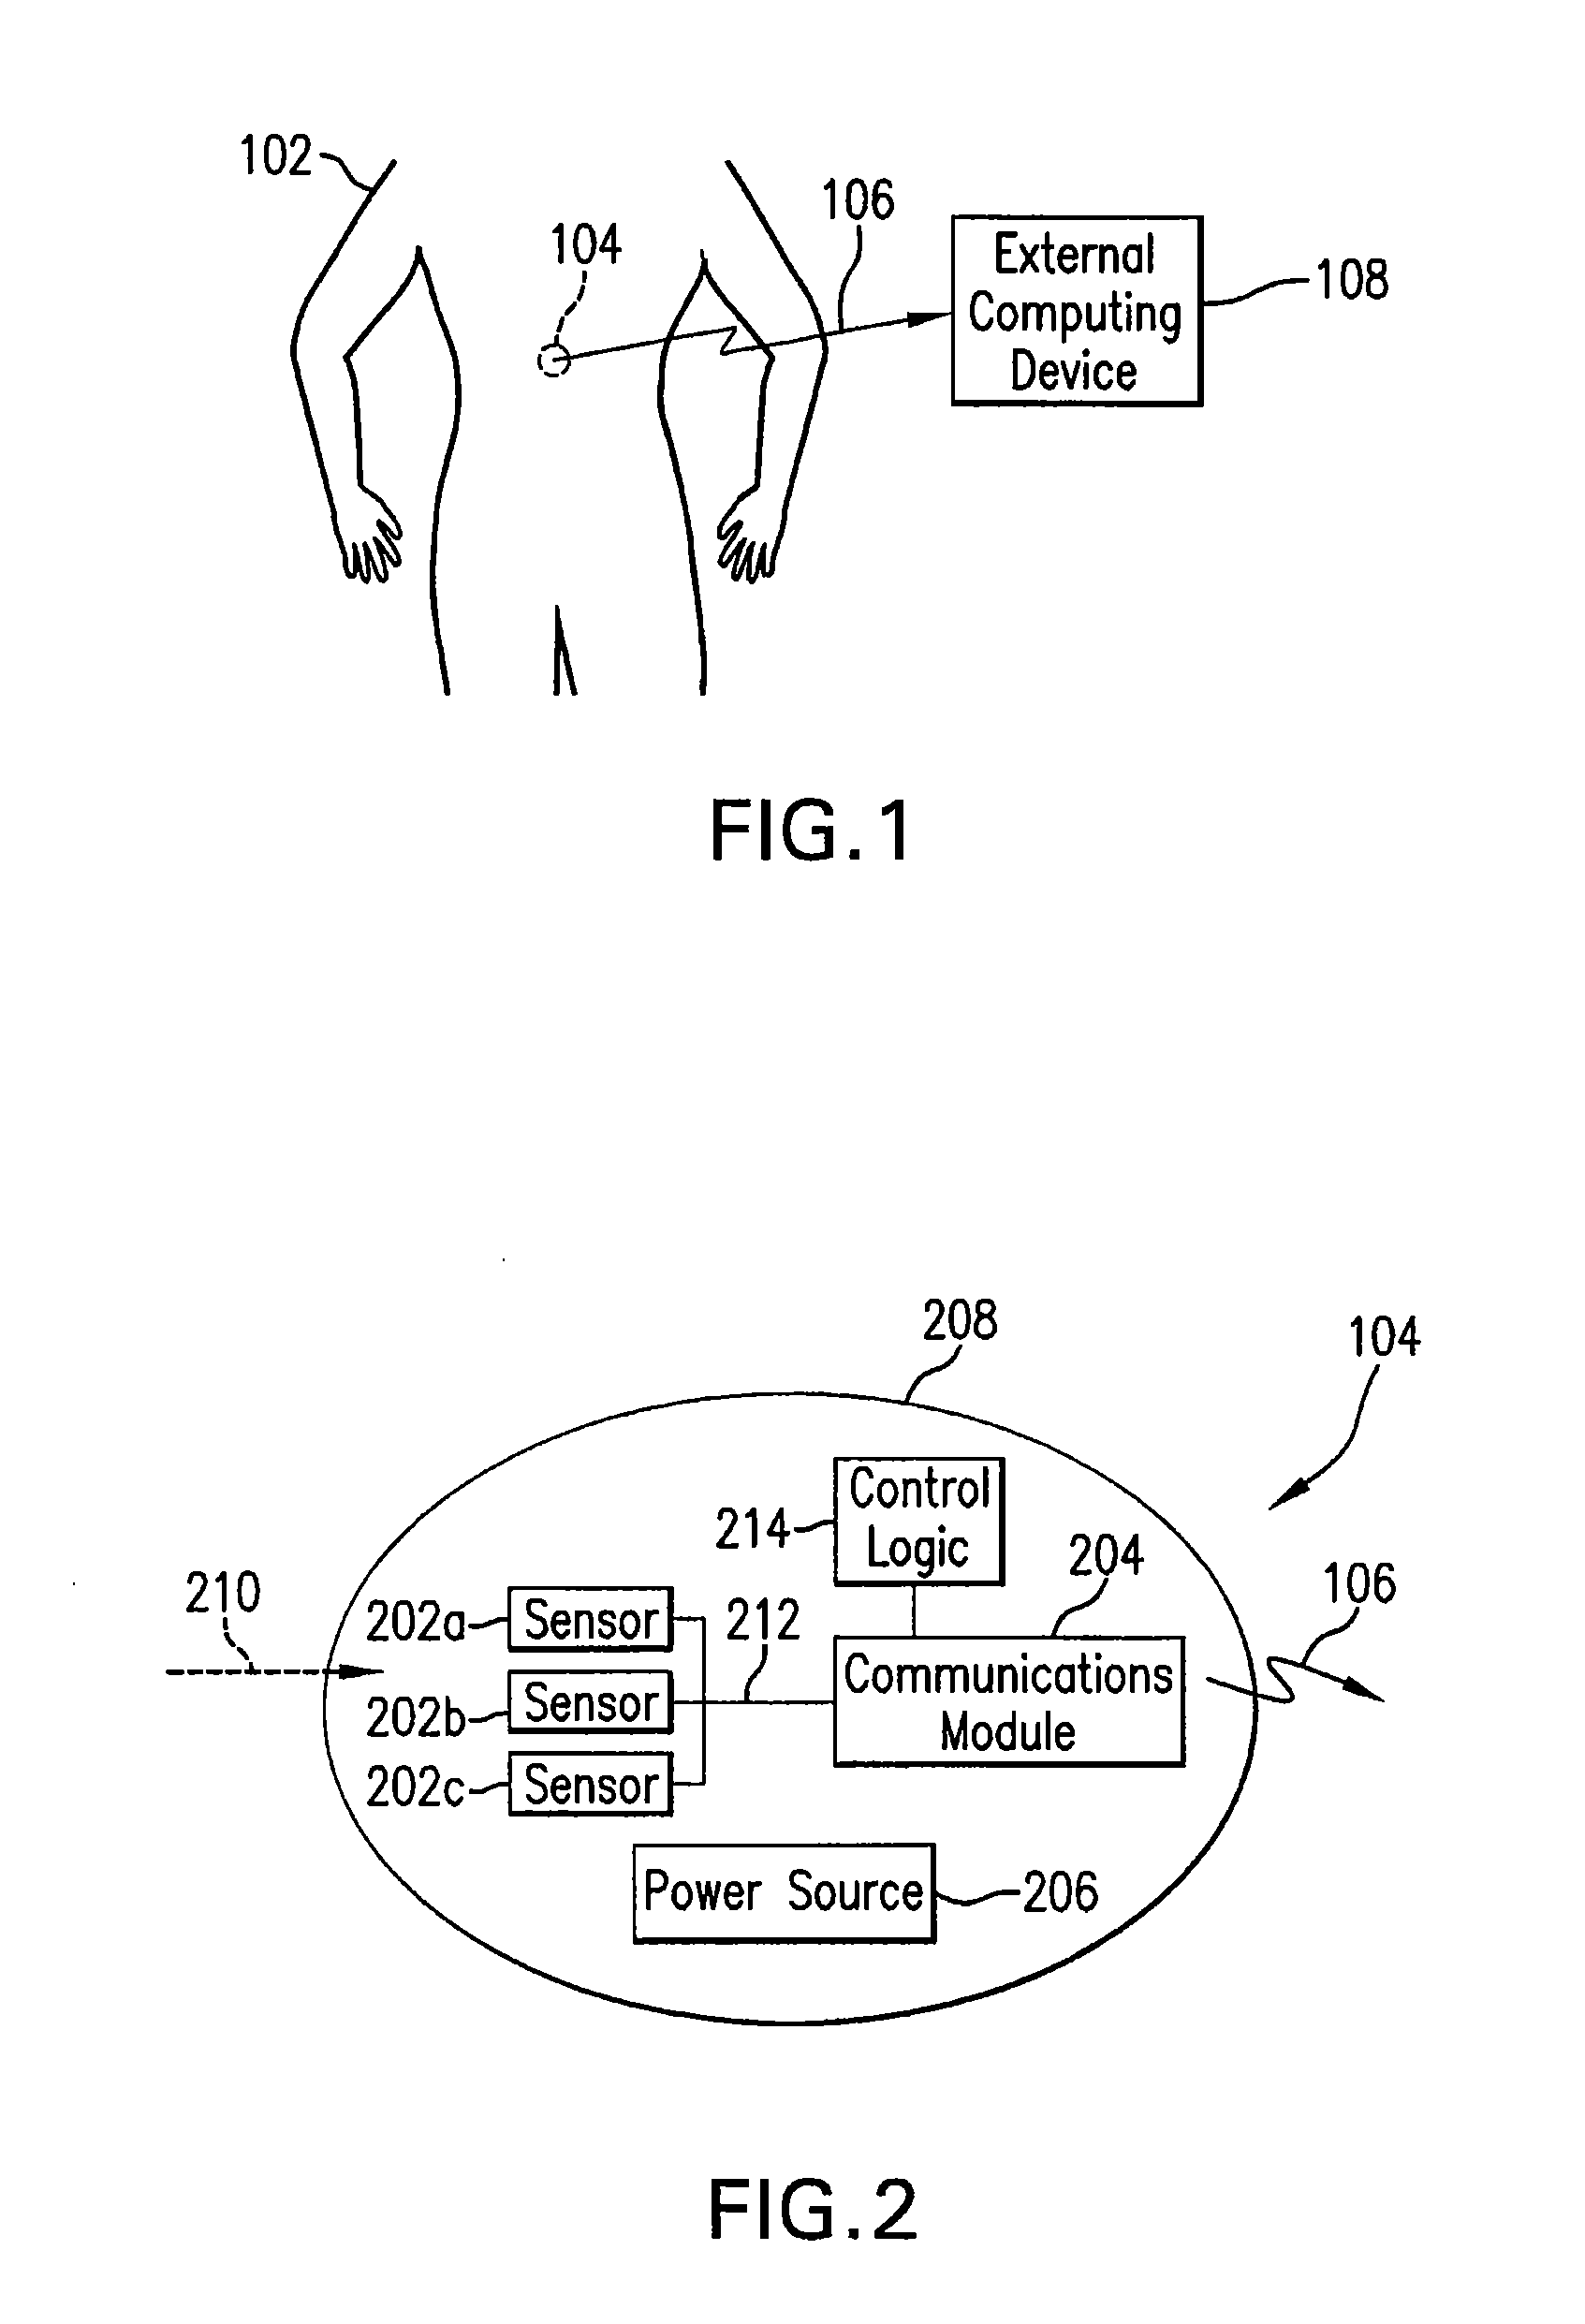 System and Method for Acoustic Information Exchange Involving an Ingestible Low Power Capsule